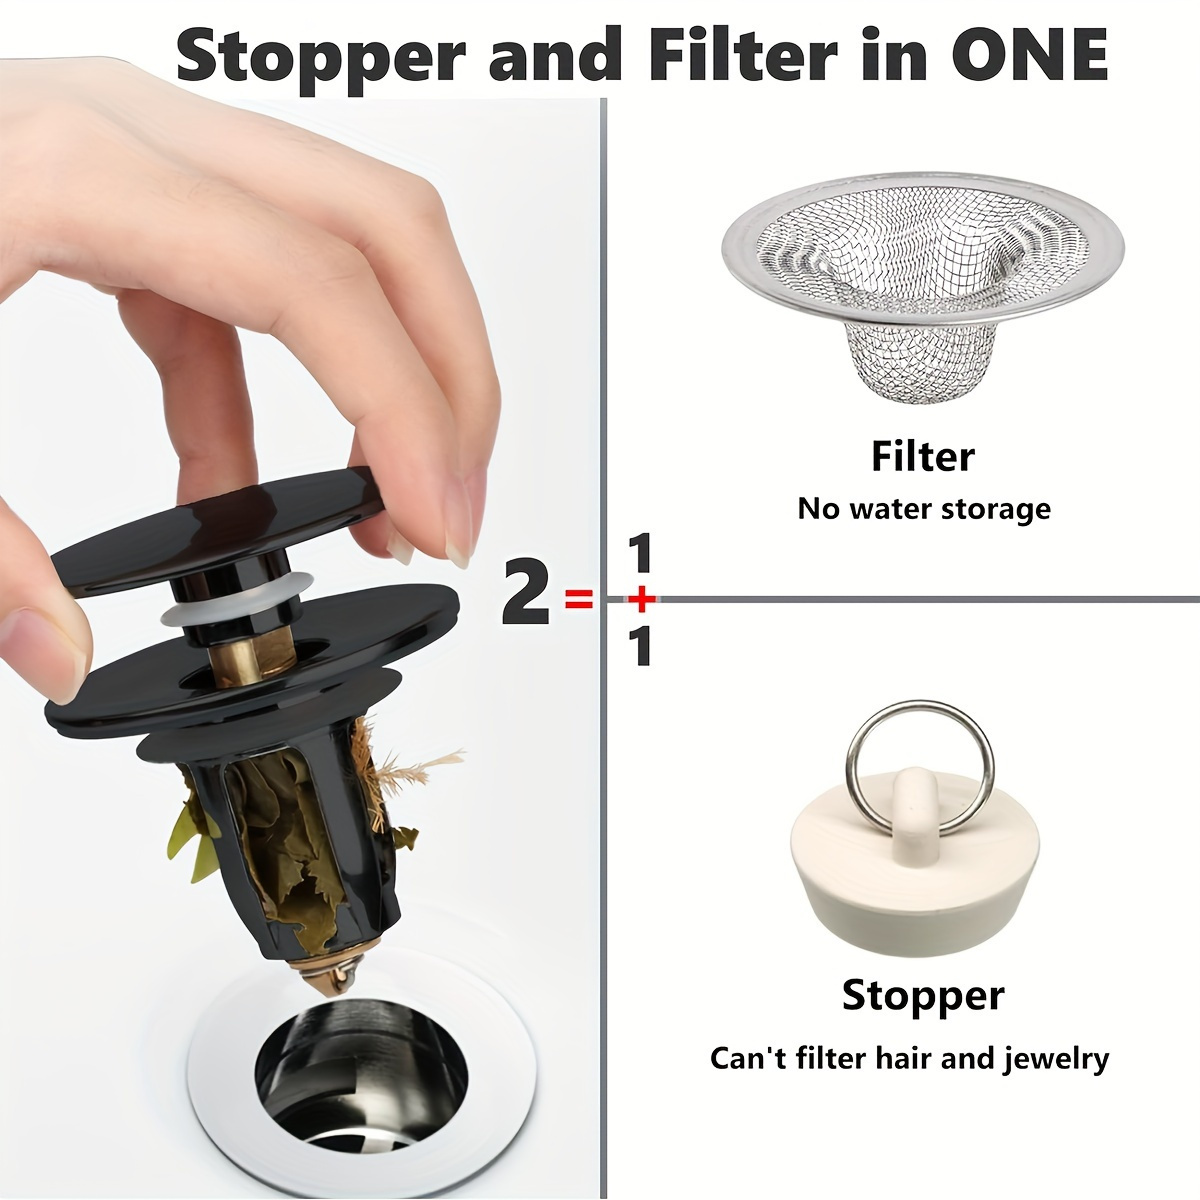 

1pcs Universal 2-in-1 Bathroom Sink Drain Stopper And Strainer, Hair Catcher Basket, Non-electric Pop-up Drain Filter, Solid With Heavy-duty Spring - Fits 1.1-1.5 Inch Drain Holes